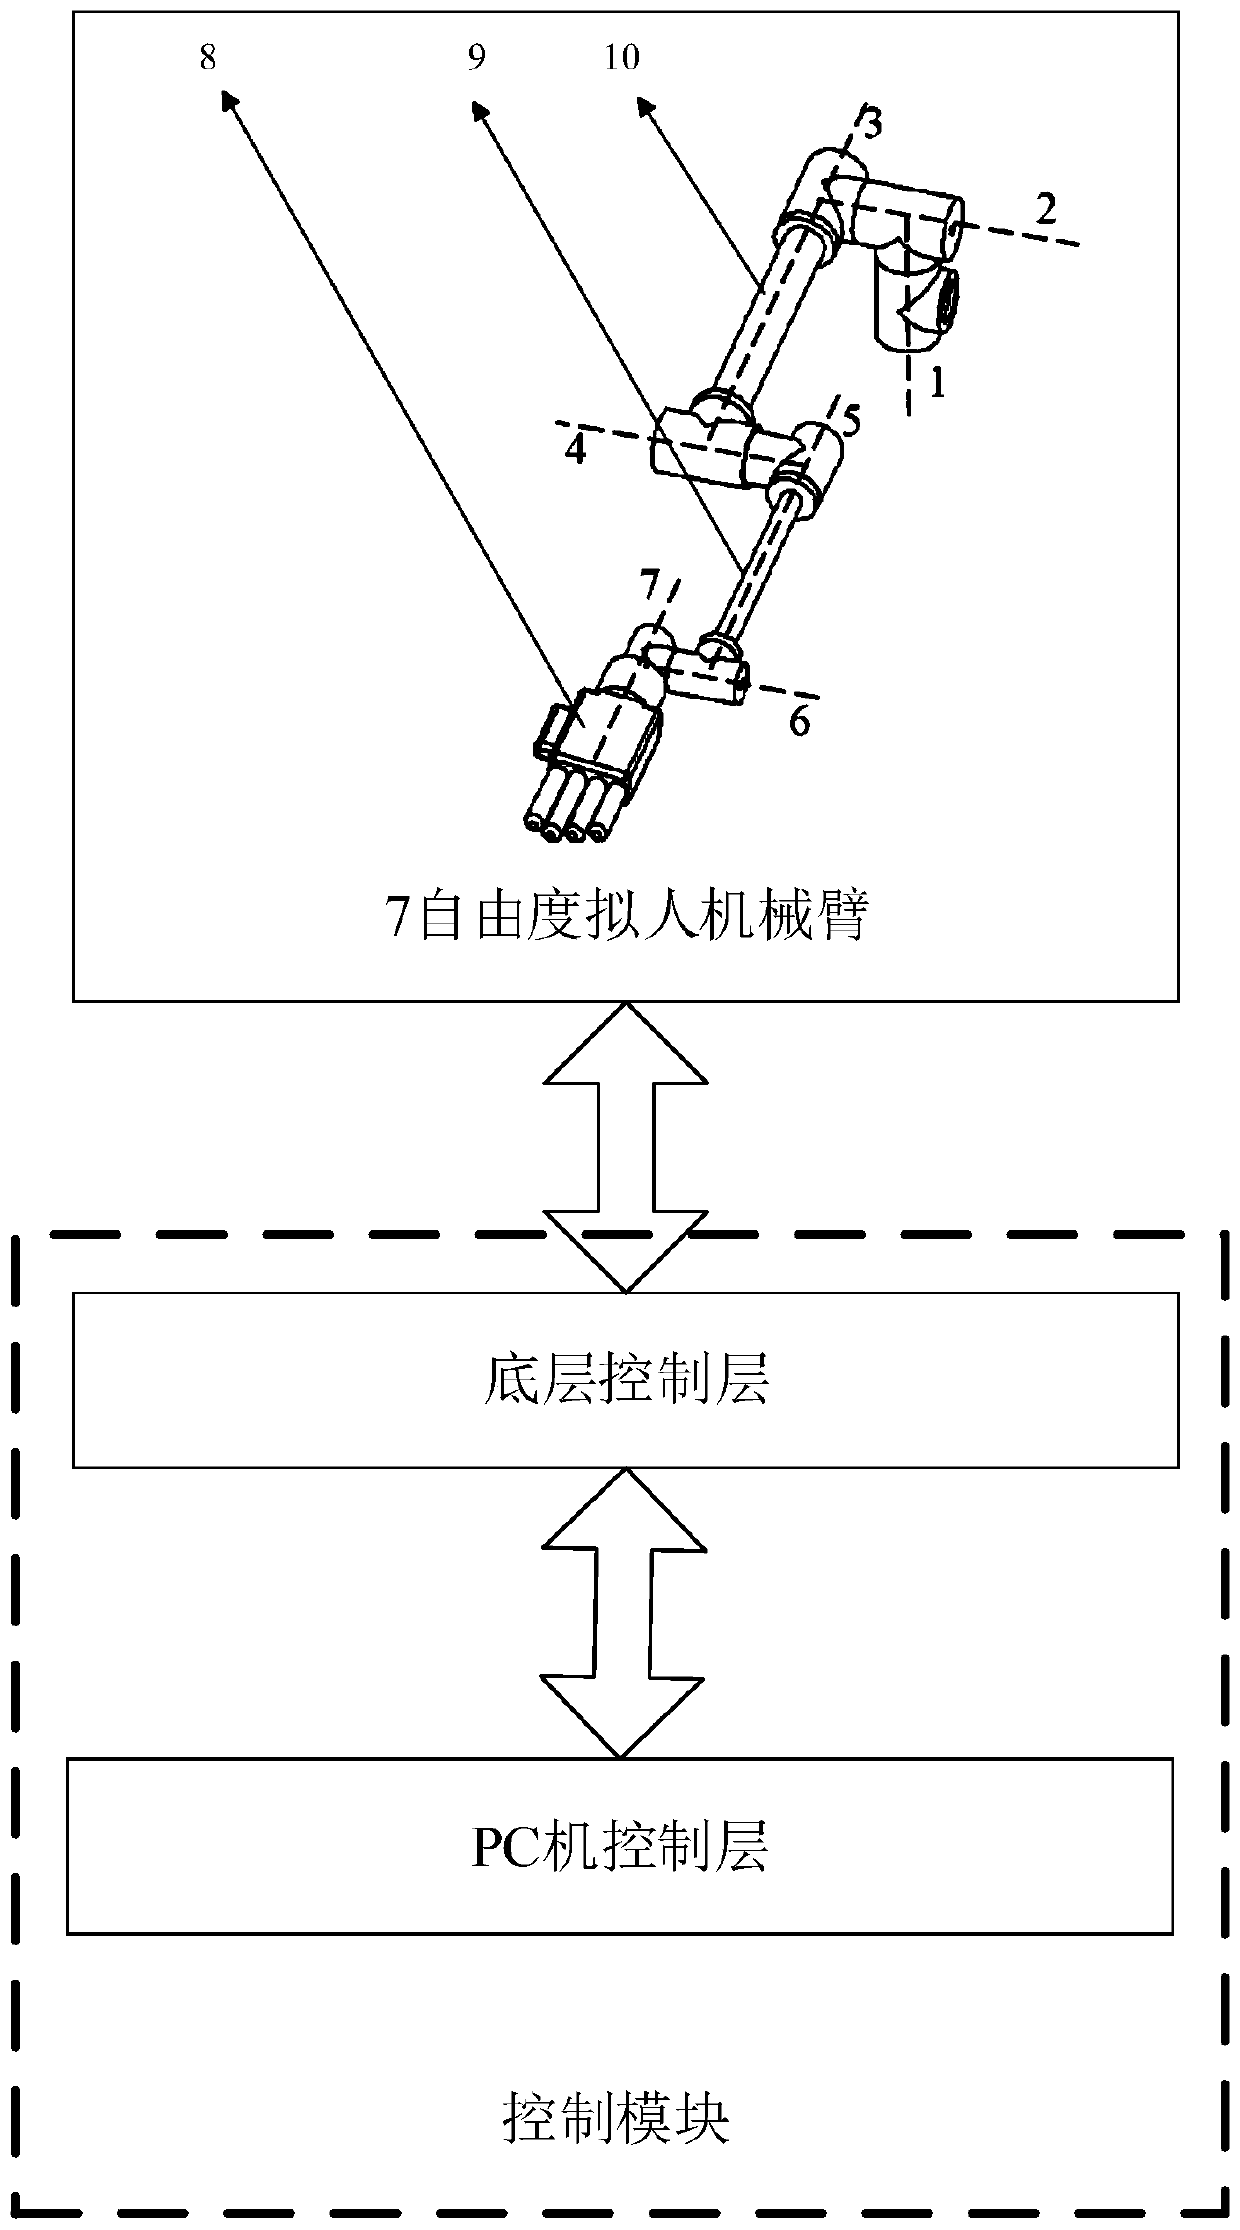 A 7-degree-of-freedom humanoid robot arm and its control method and system